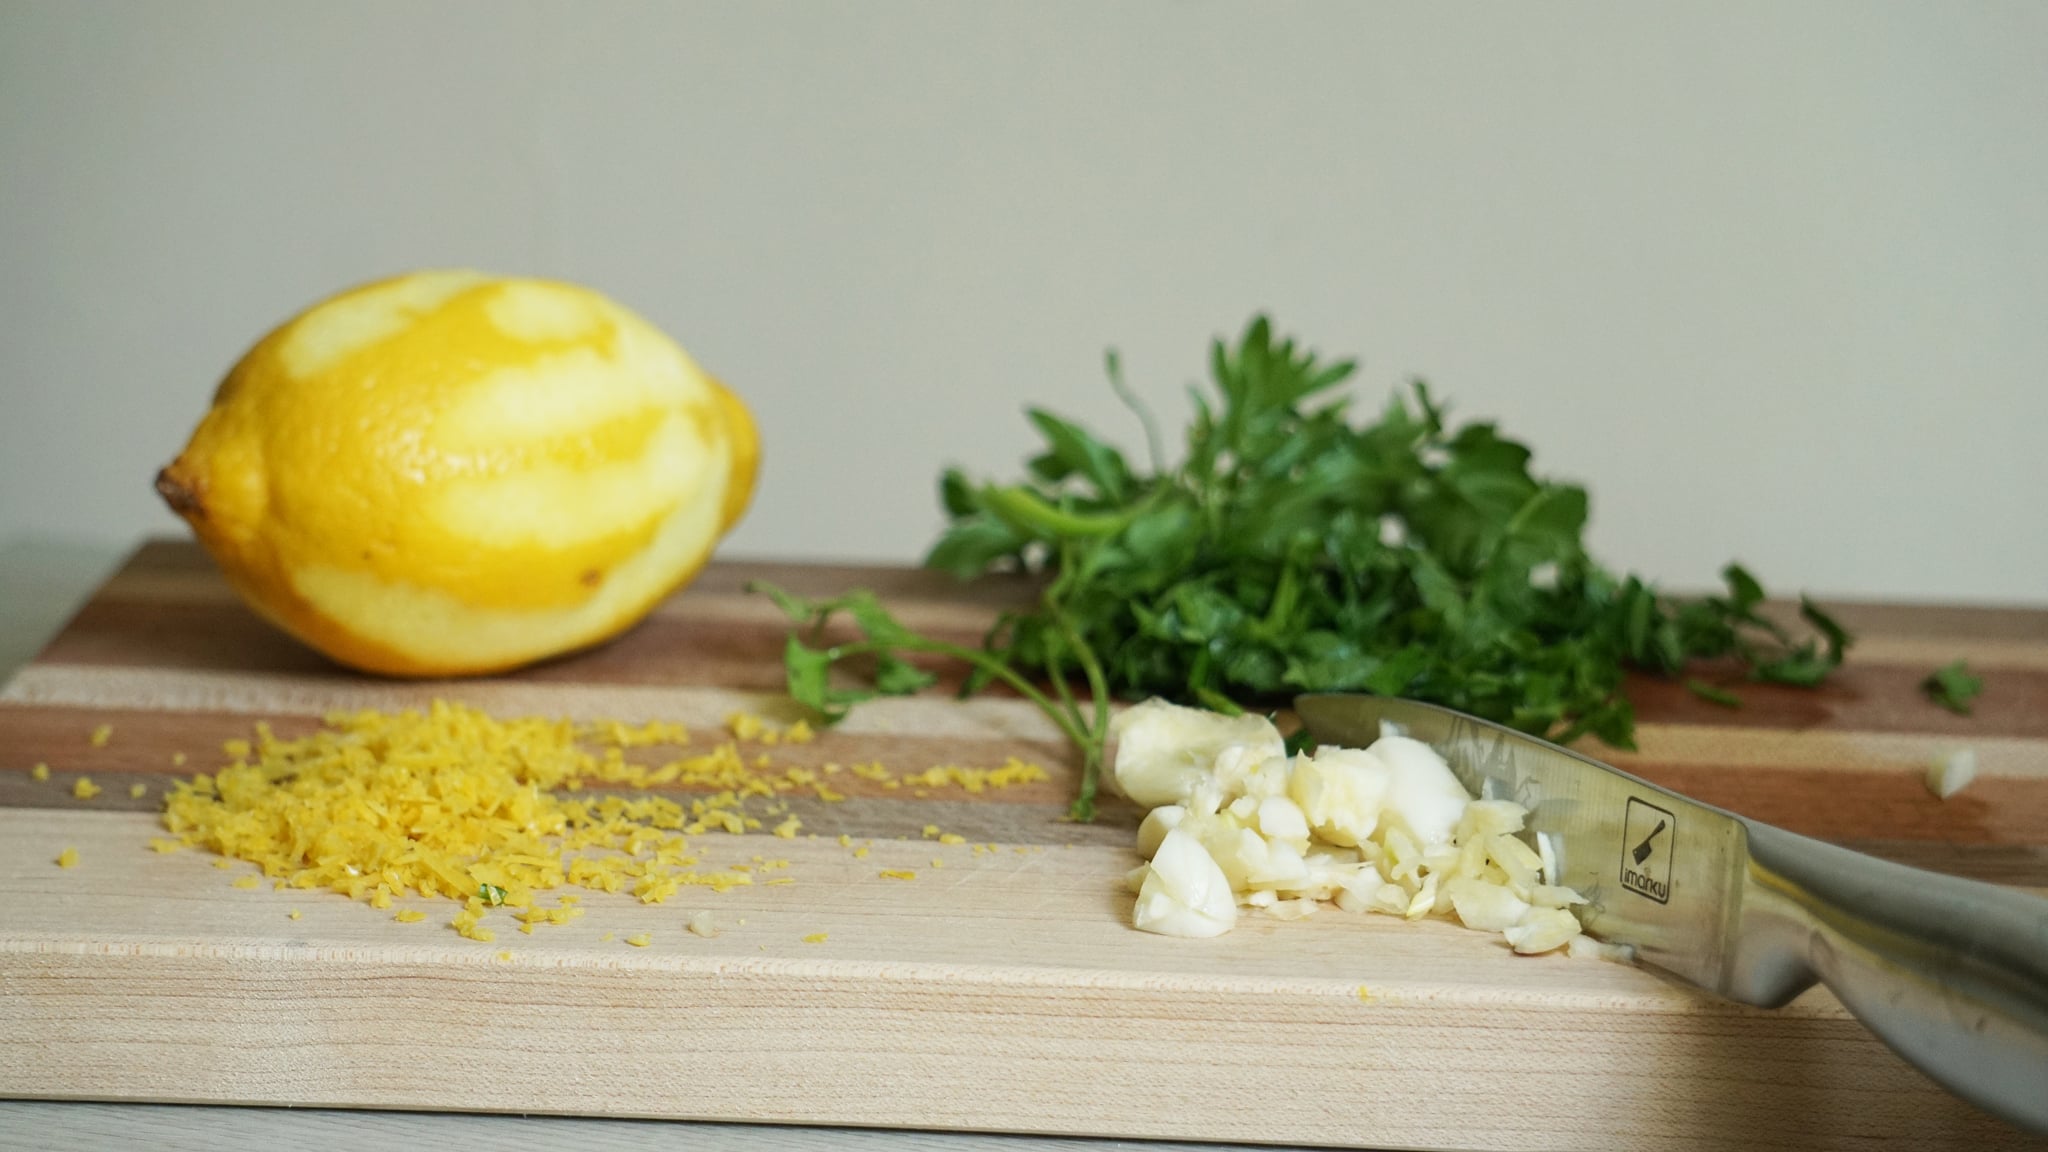 dirty martini pasta recipe ingredients on a cutting board